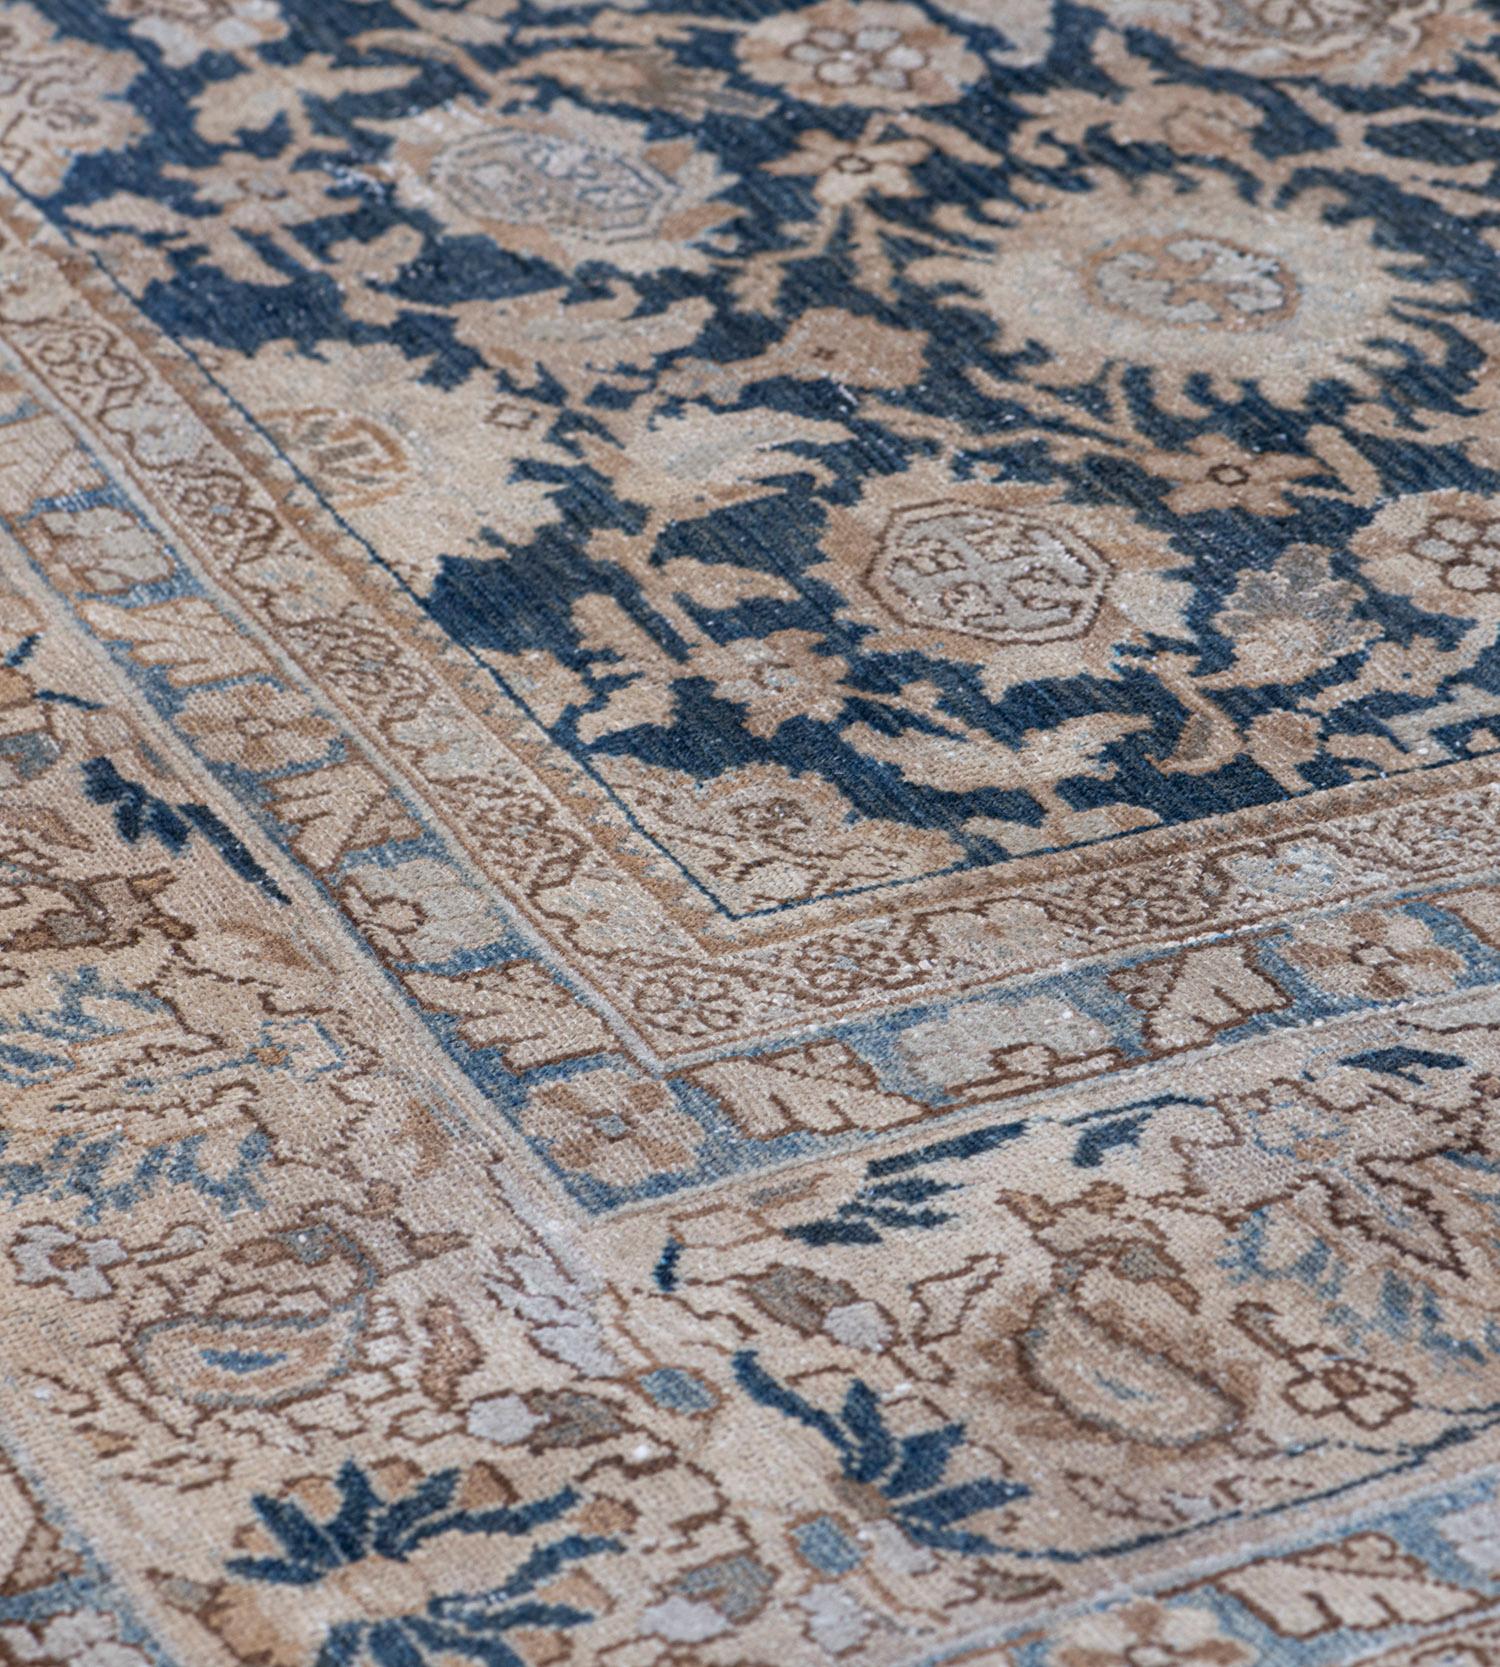 This traditional handwoven Persian Malayer rug has an indigo overall field of palmette pendants issuing a dense network of flowering vines, in an imperial beige scrolling palmette border, between complementary floral vine stripes.